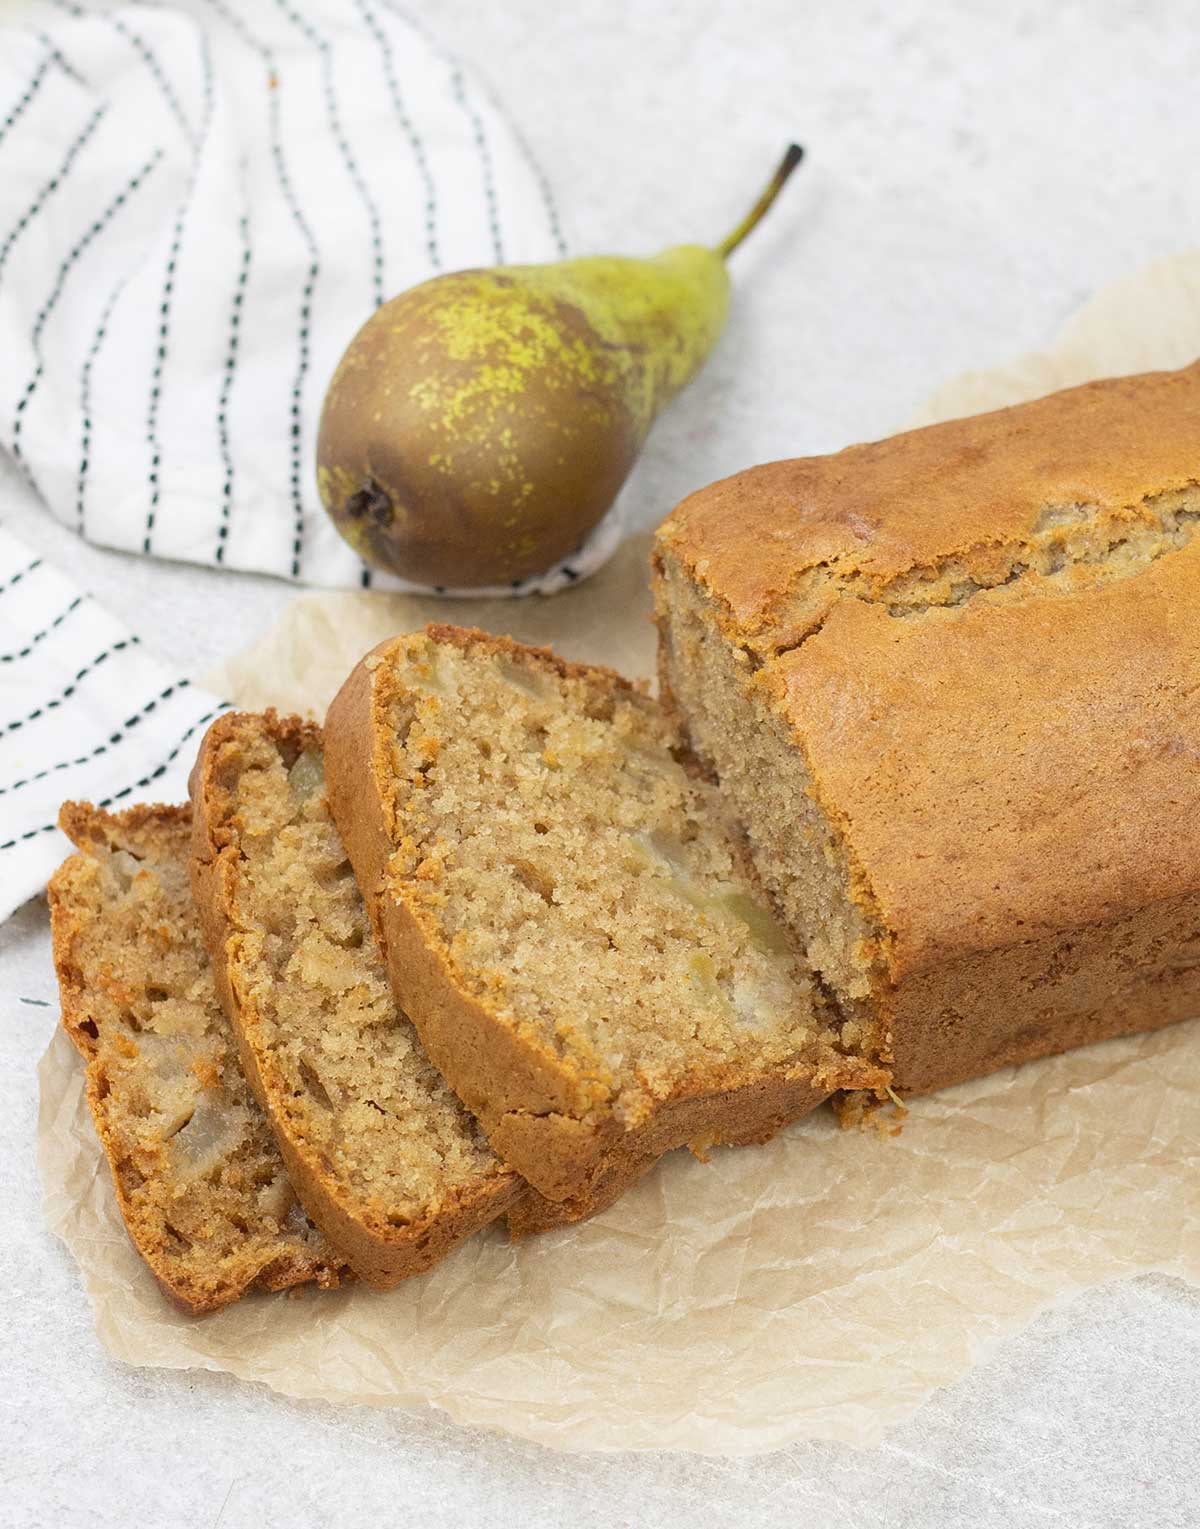 Pear Bread slices and some pears around it